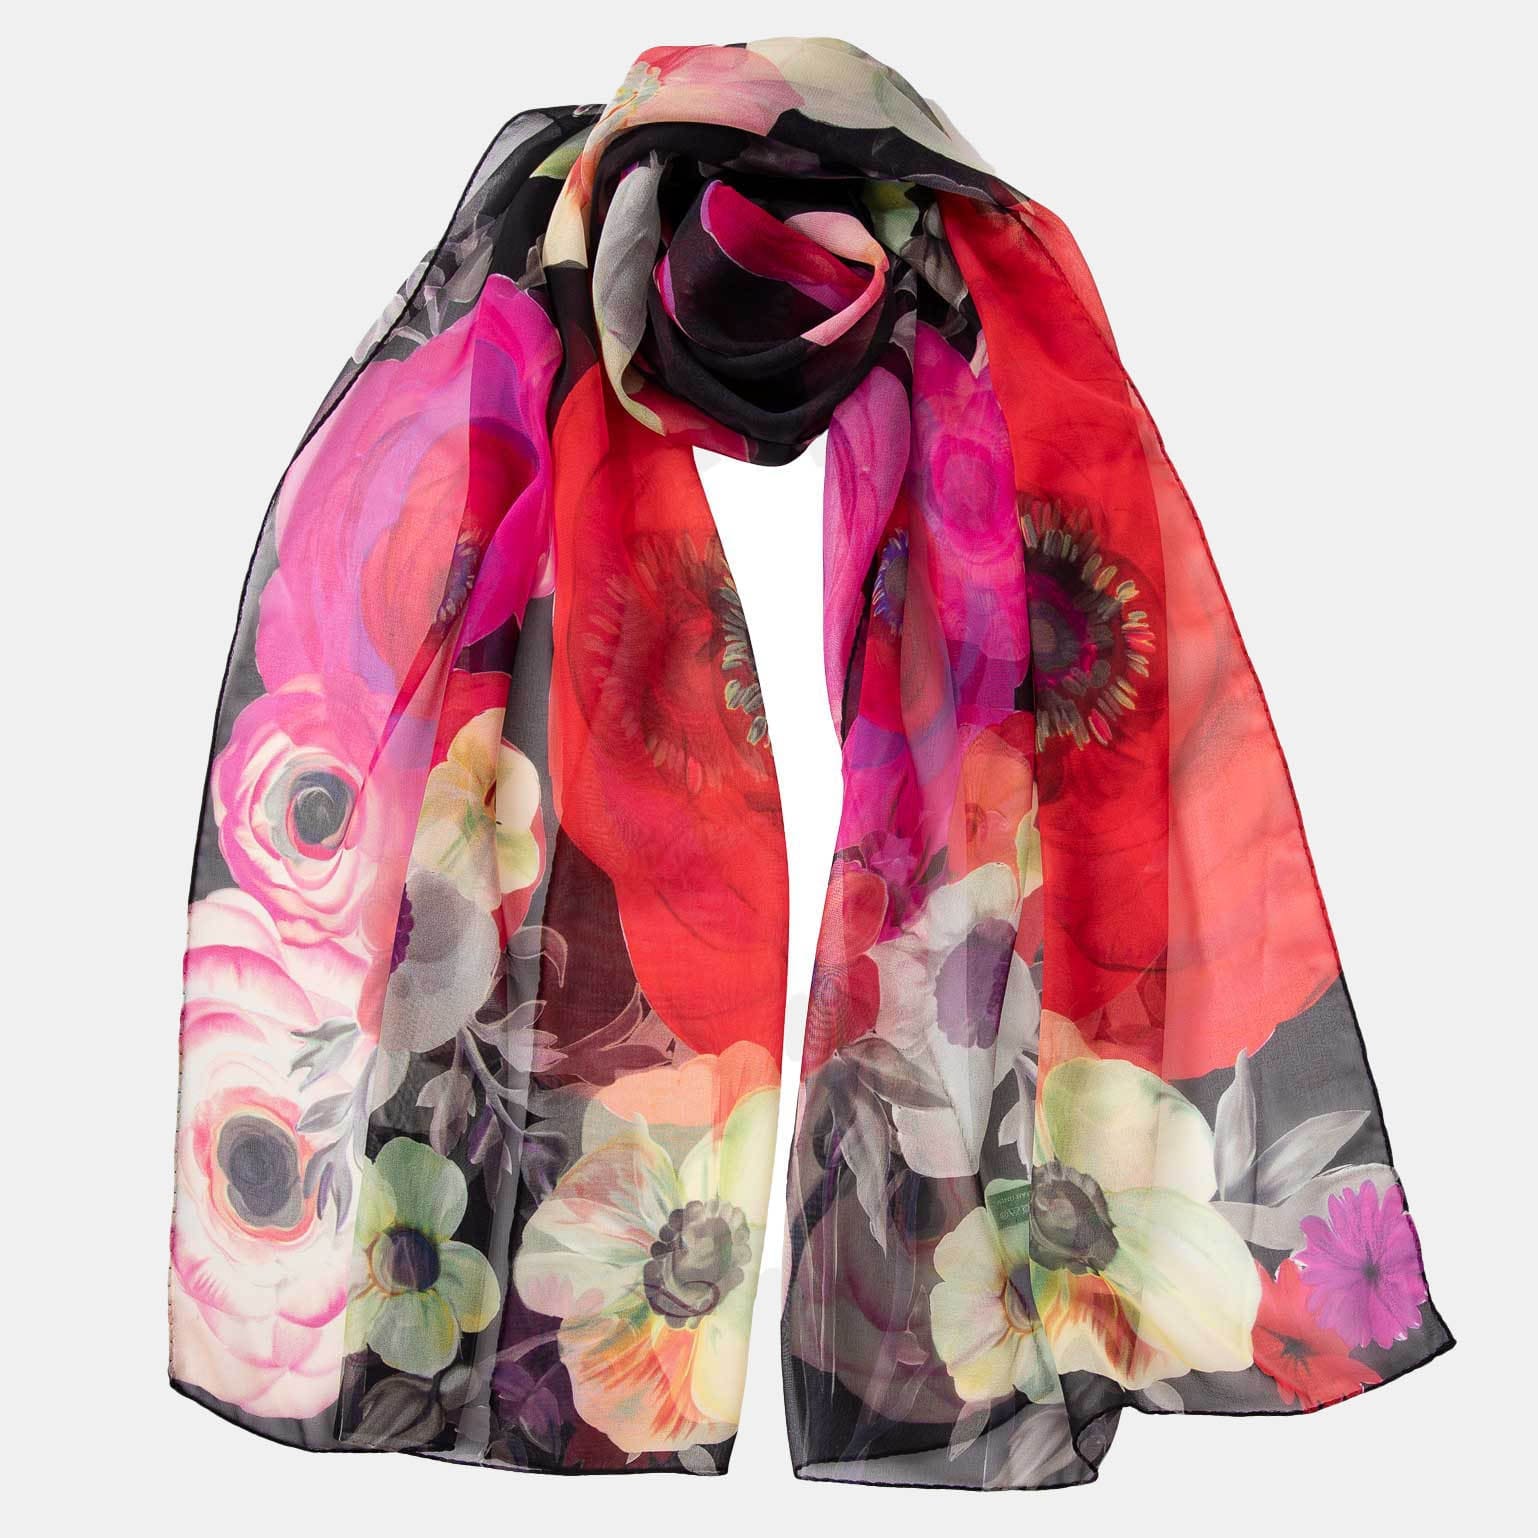 Italian silk scarf for women black and red floral